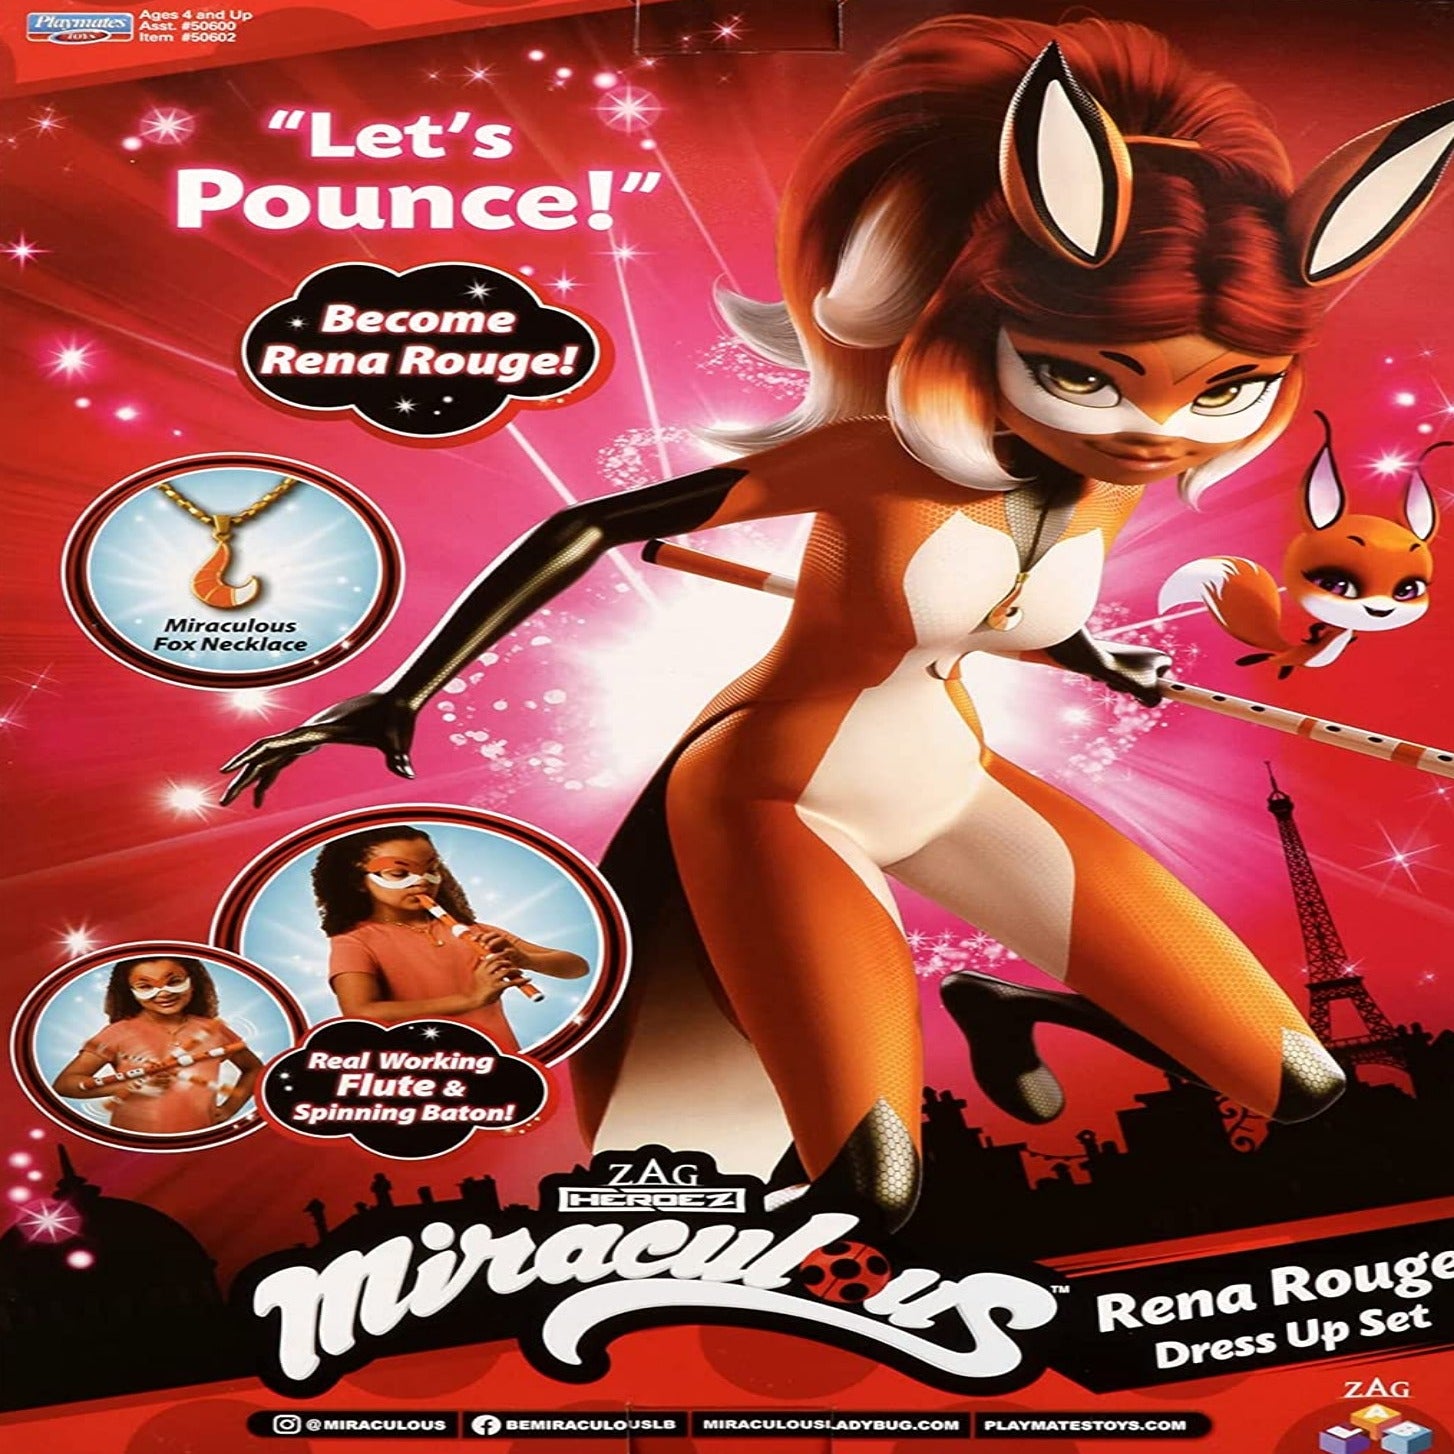 Miraculous Ladybug Rena Rouge Dress Up Set with Flute, kwami, mask and Fox Pendant by Playmates Toys - Dress up and pretend play Heretoserveyou